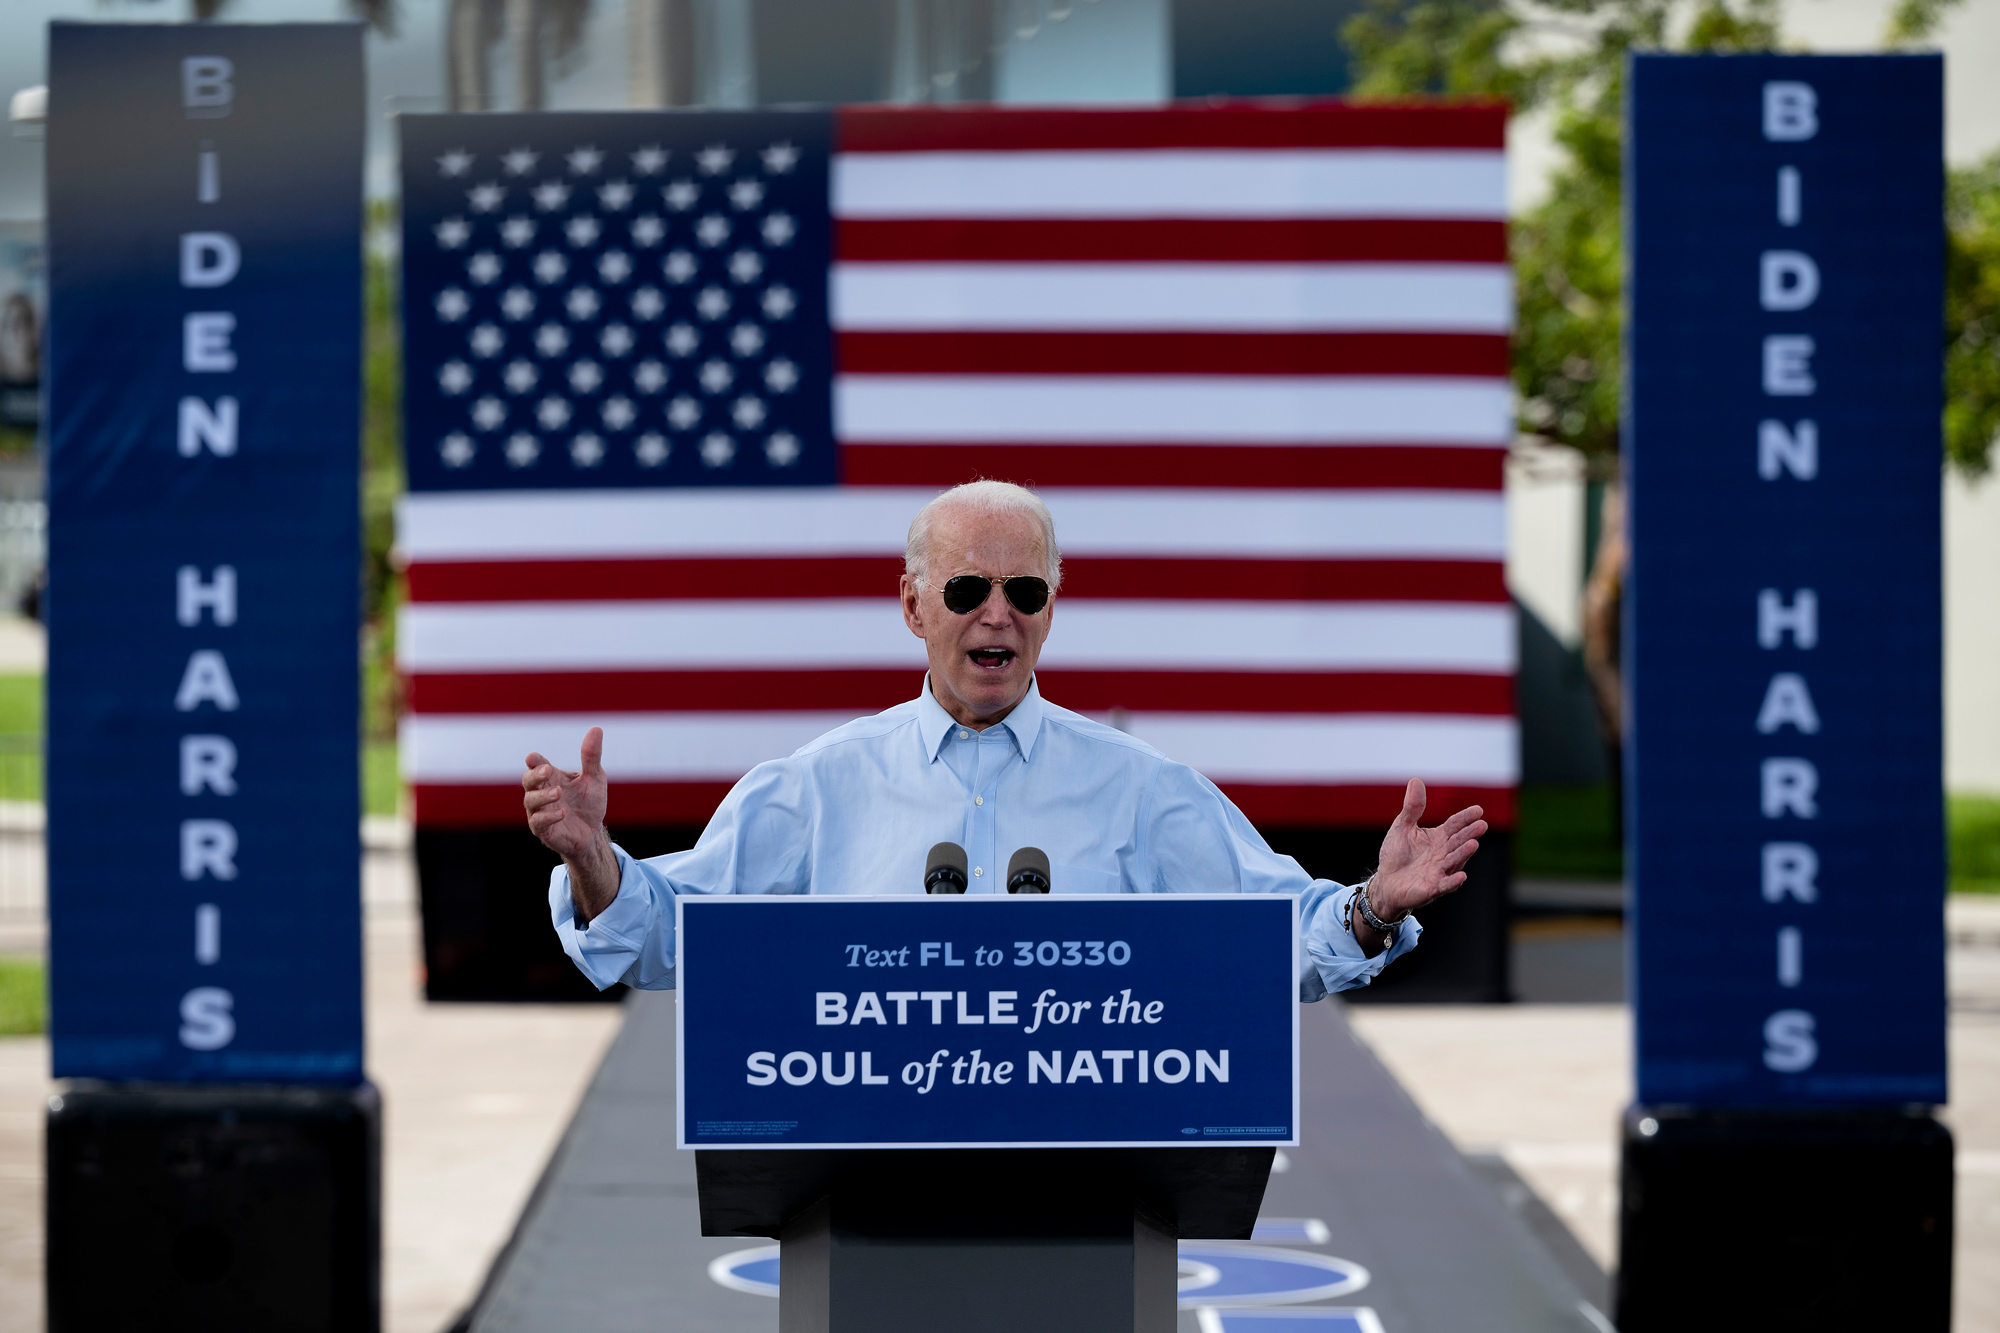 Democratic Presidential candidate Joe Biden delivers remarks at a Drive-in event in Coconut Creek, Florida, on October 29.